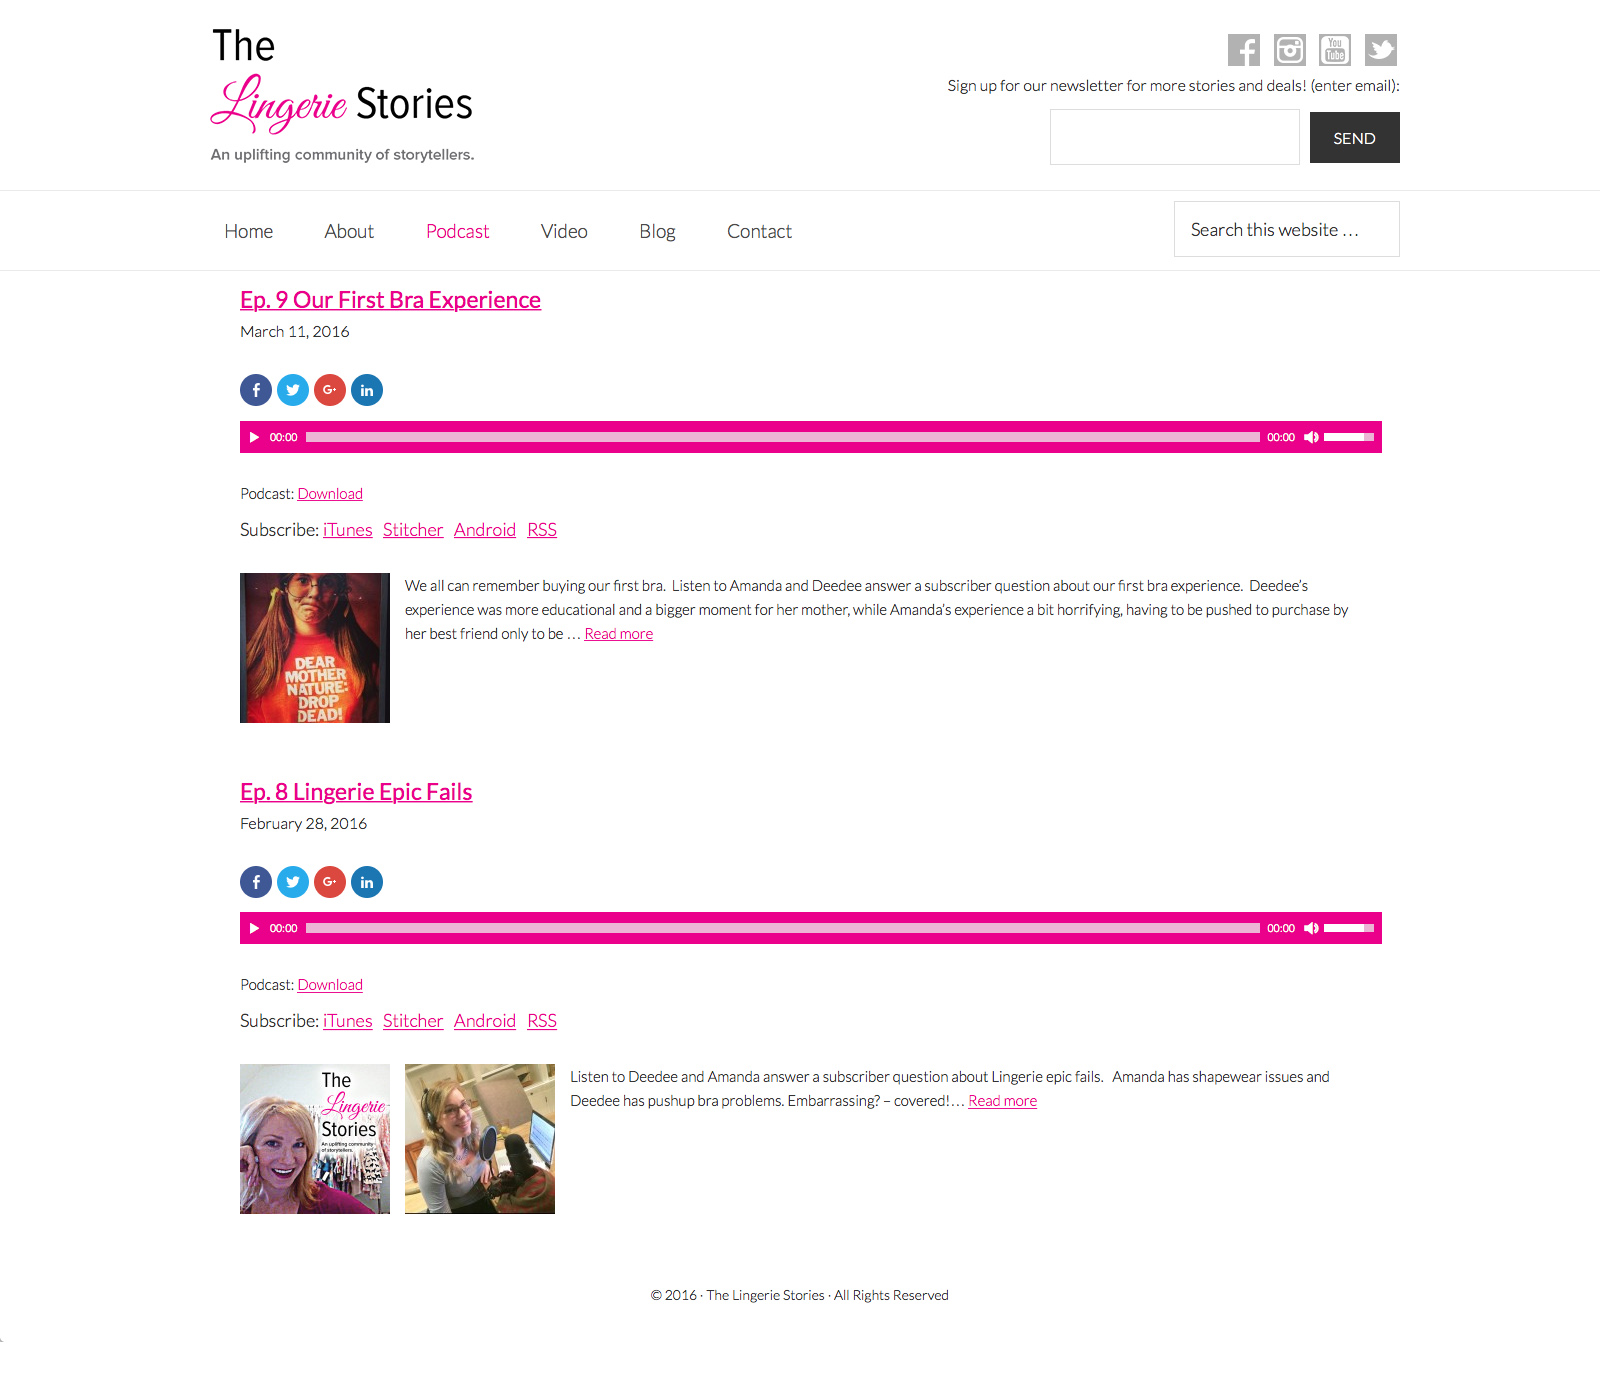 The Lingerie Stories